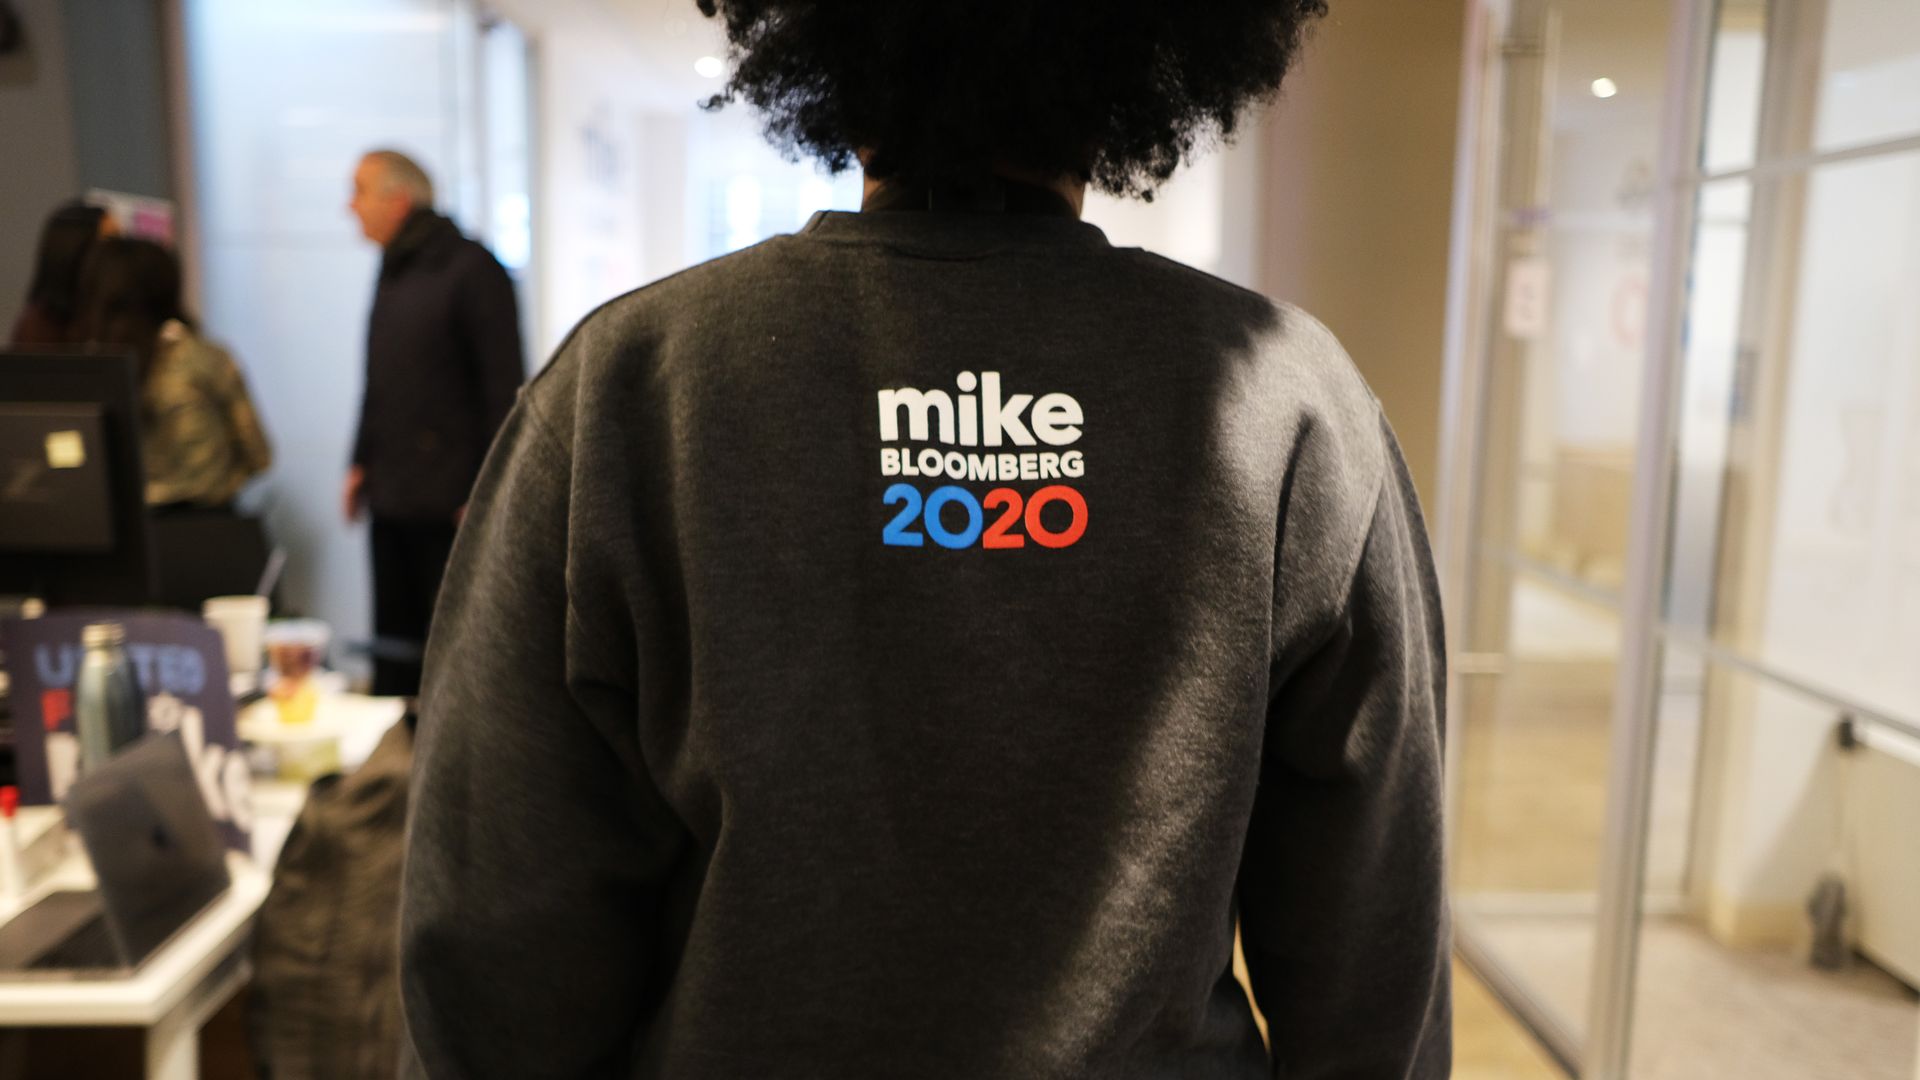 Person wearing bloomberg 2020 shirt